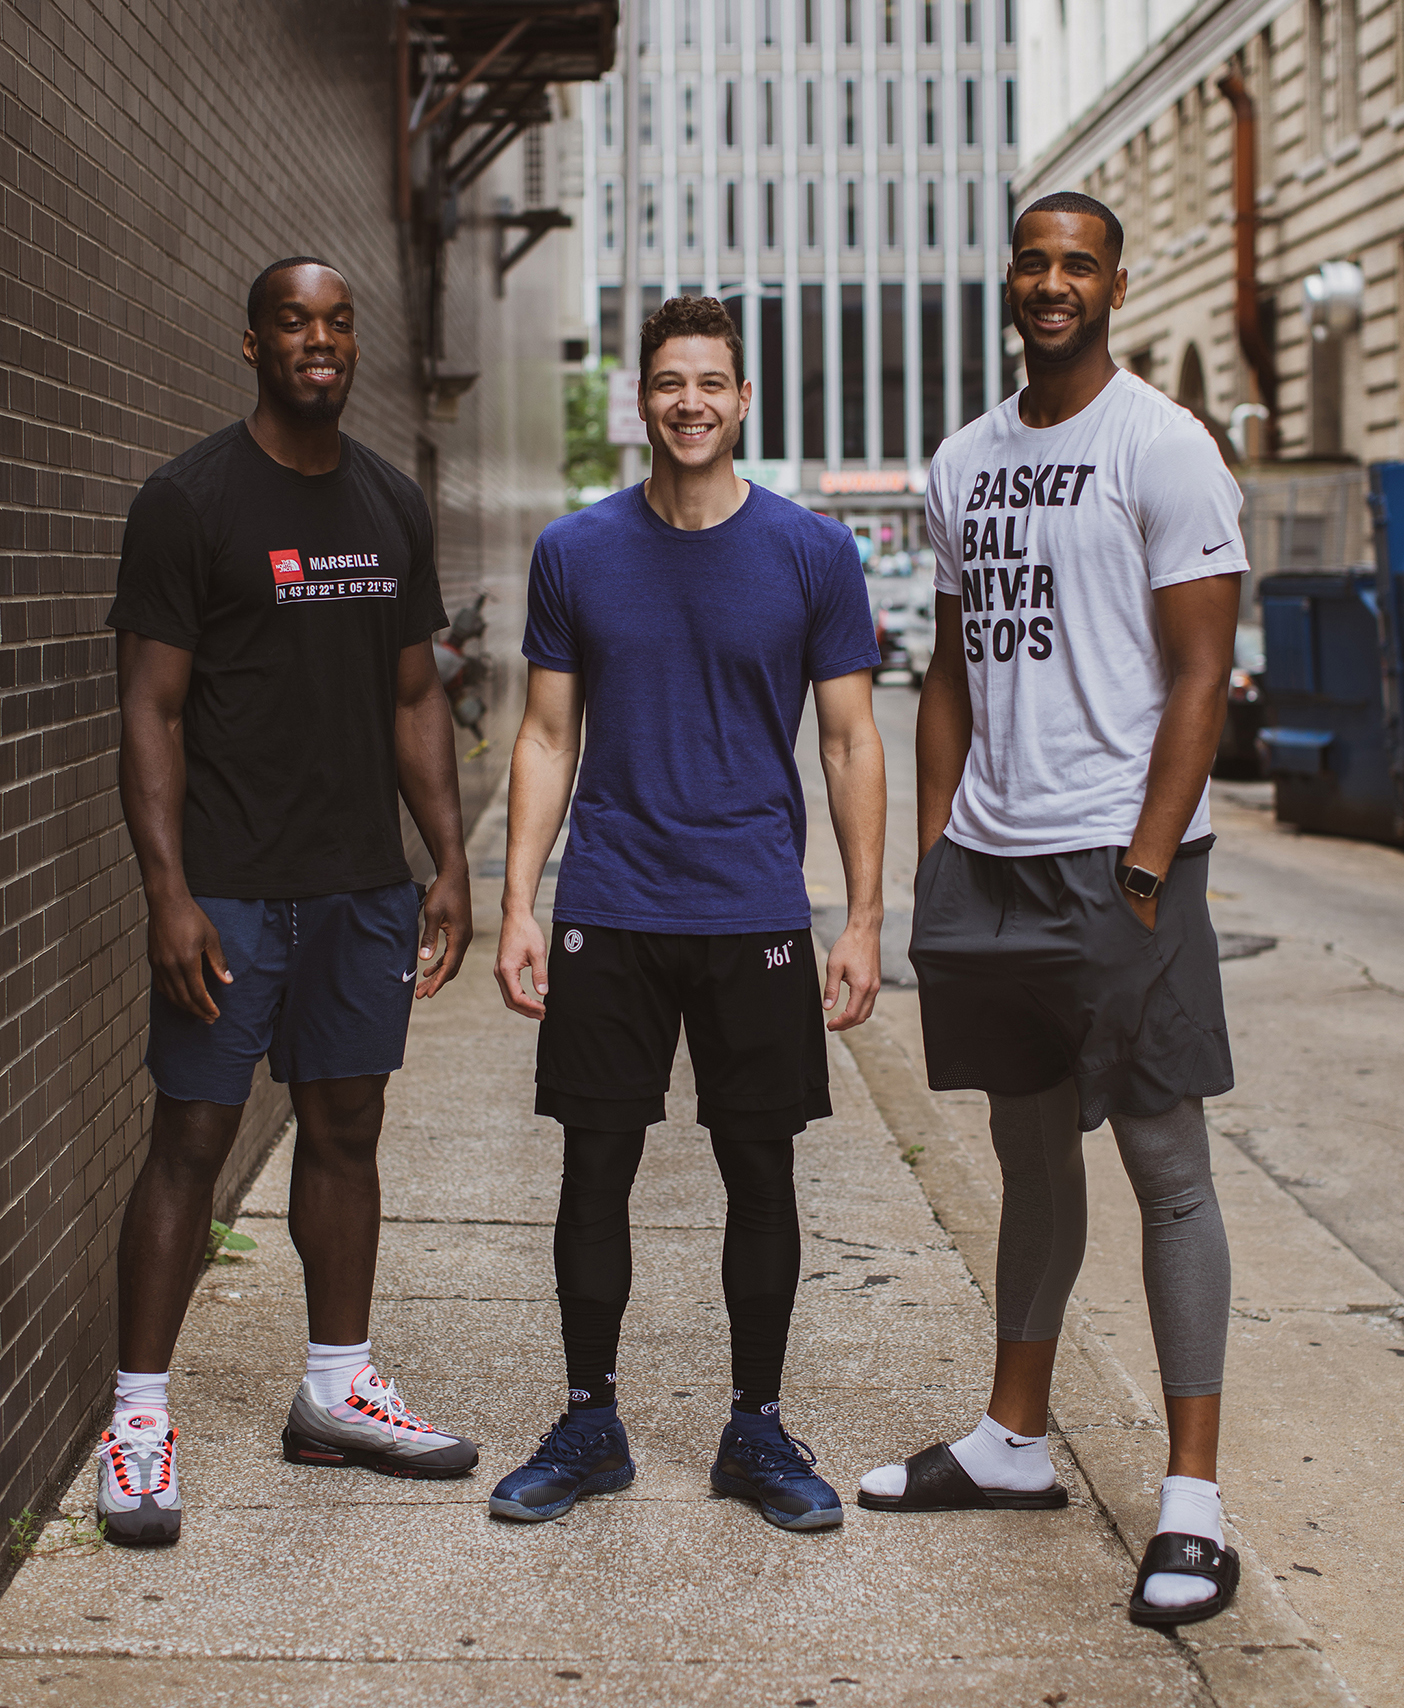 Charles Abouo, Jimmer Fredette, and Brandon Davis pose together.